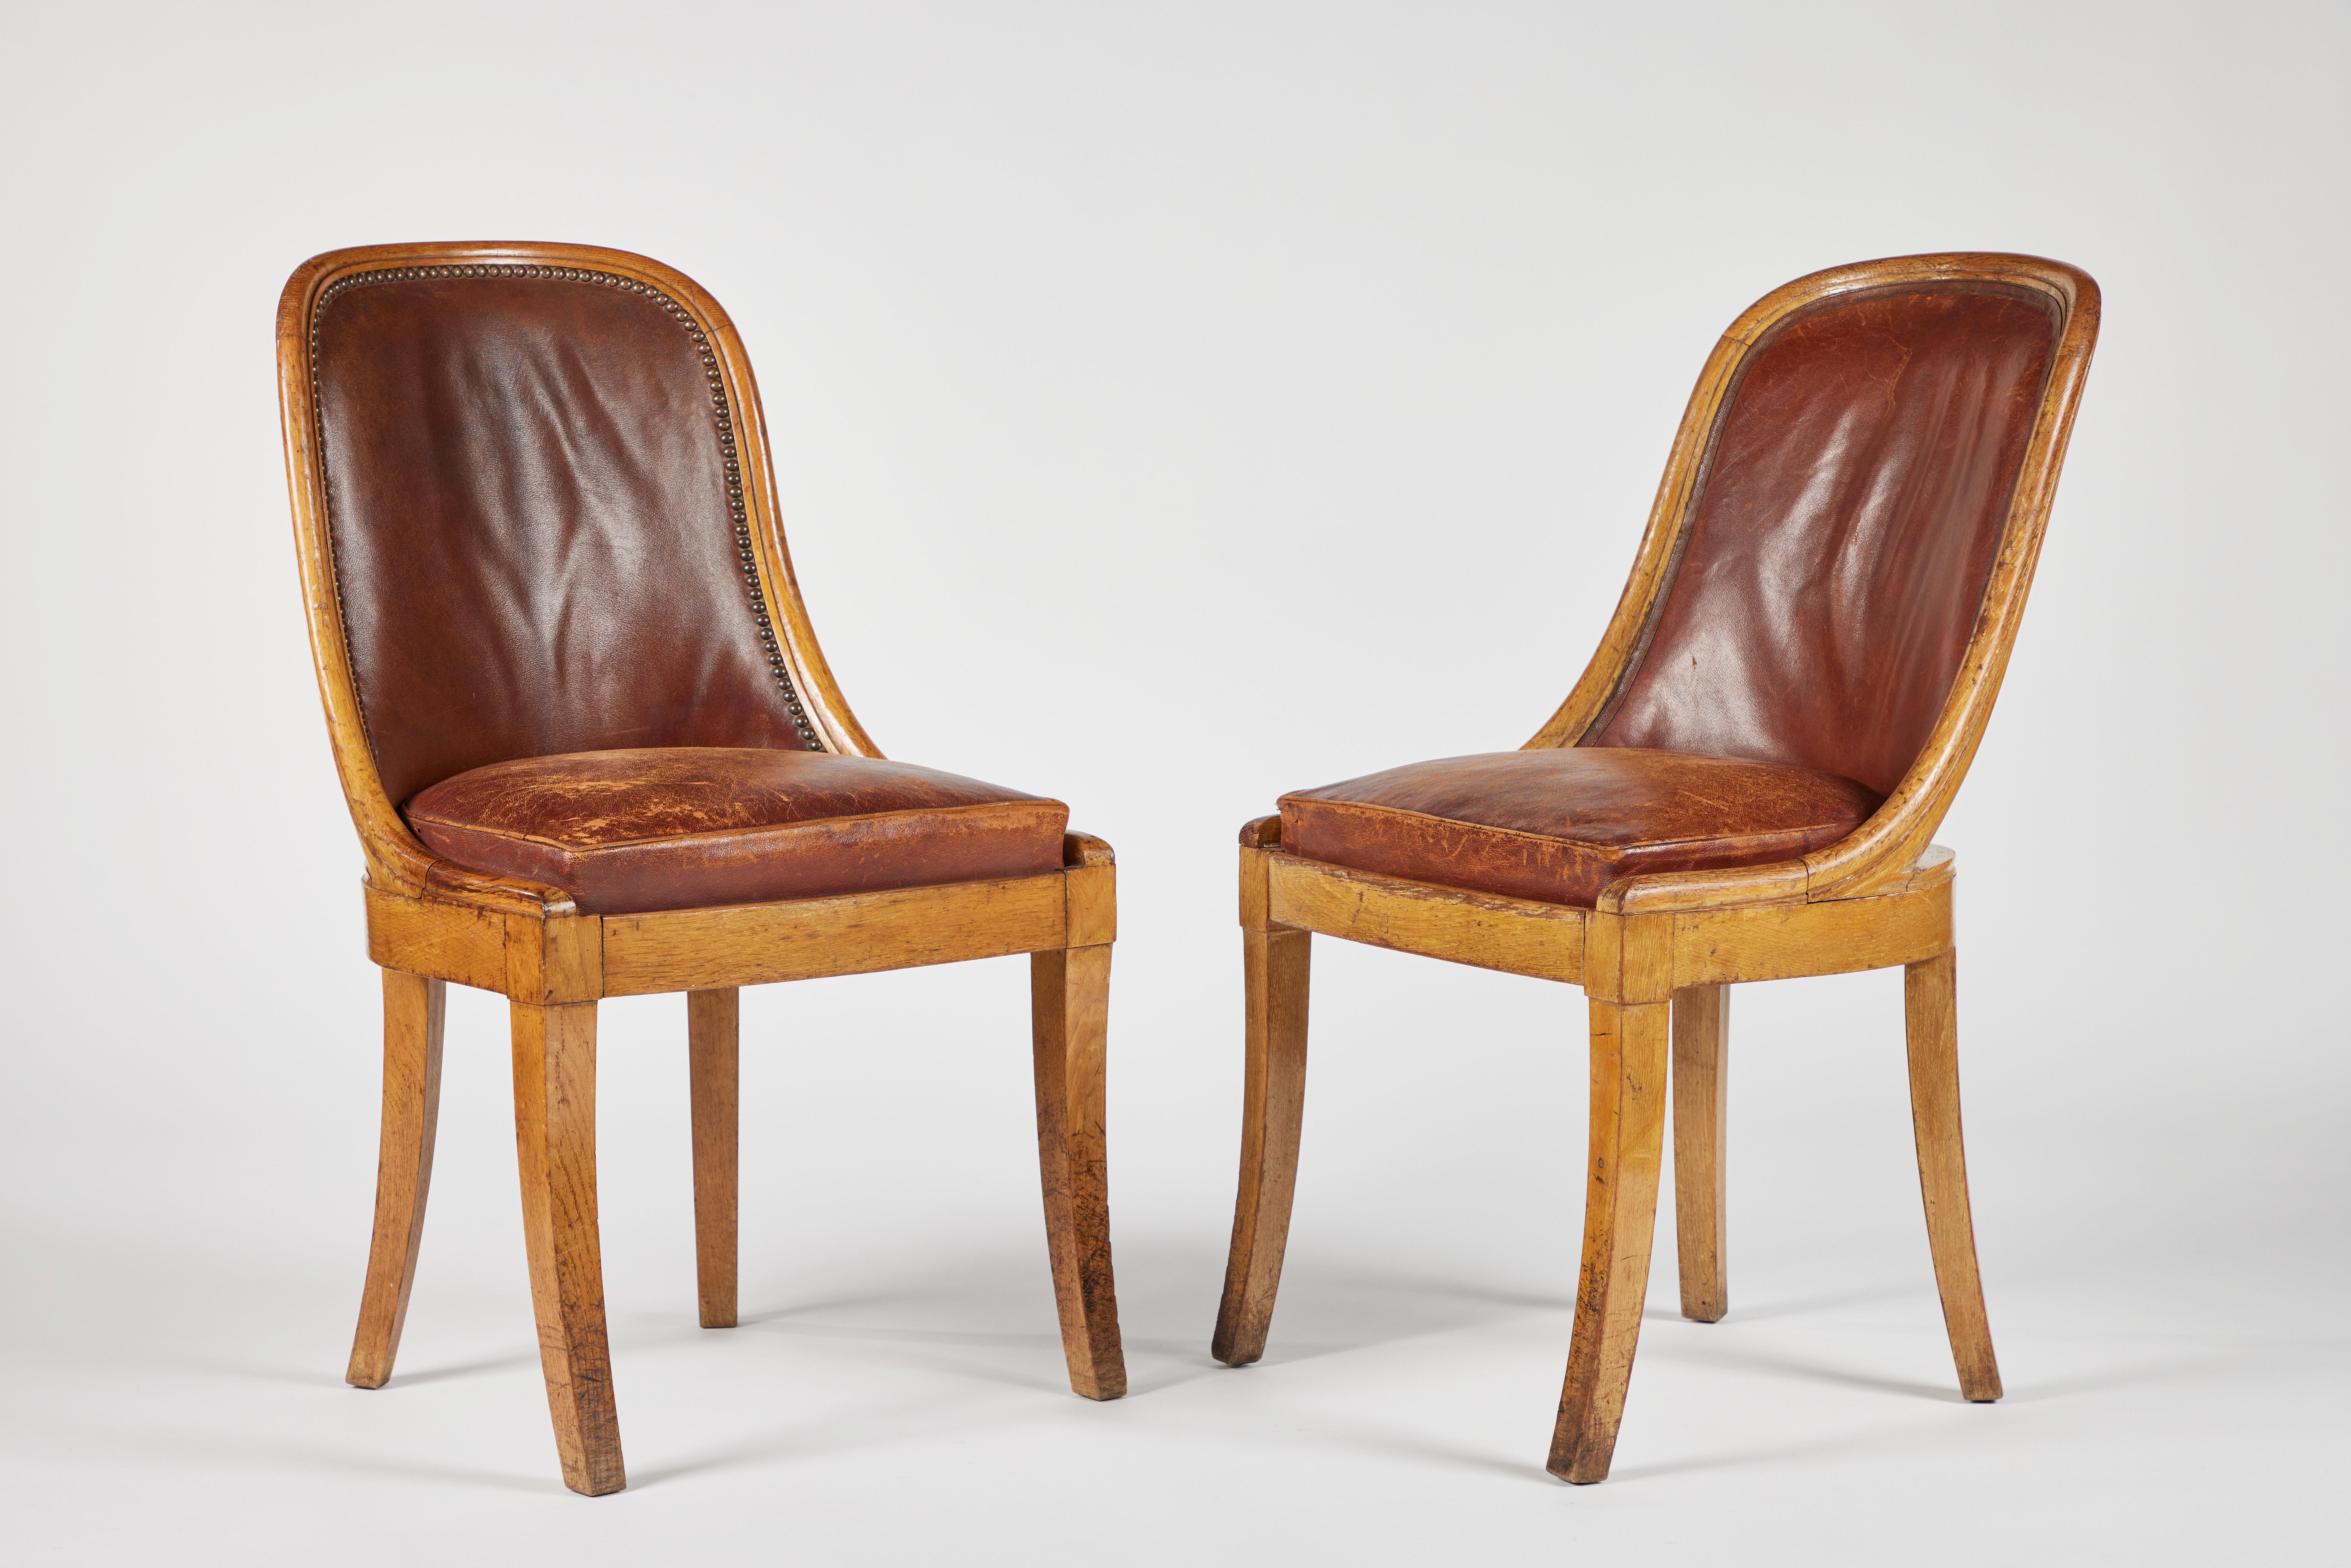 A pair of French sabre-leg oak side chairs with original leather upholstery, original sticker marked INVENTAIRE 1959.